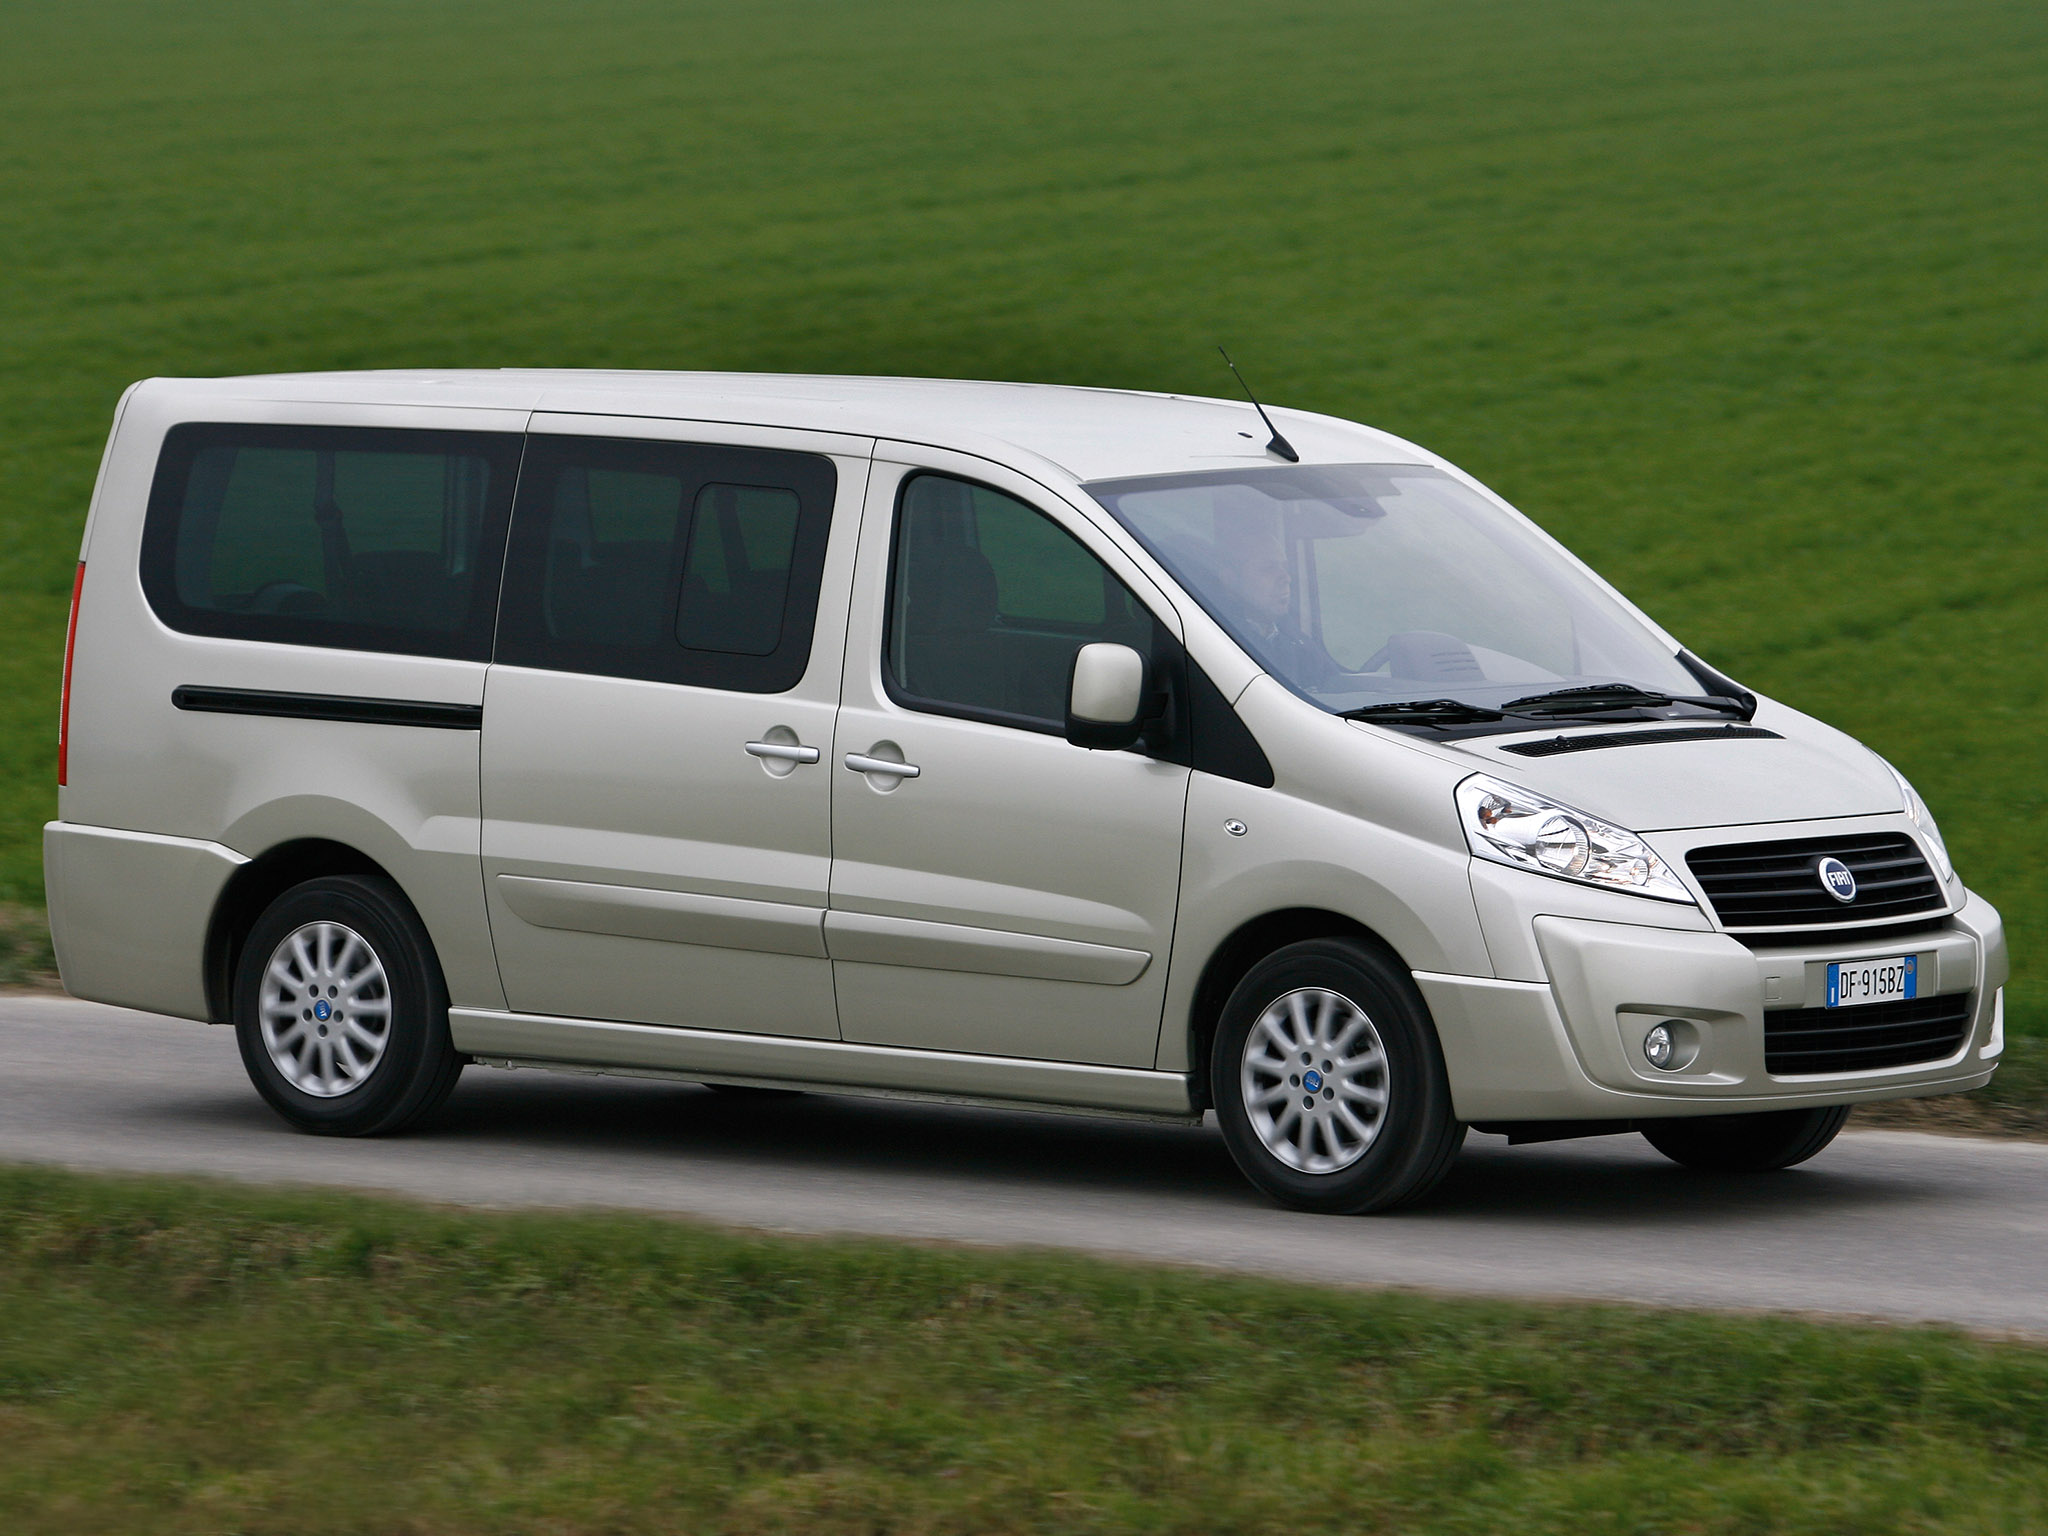 Car in pictures car photo gallery » Fiat Scudo Panorama